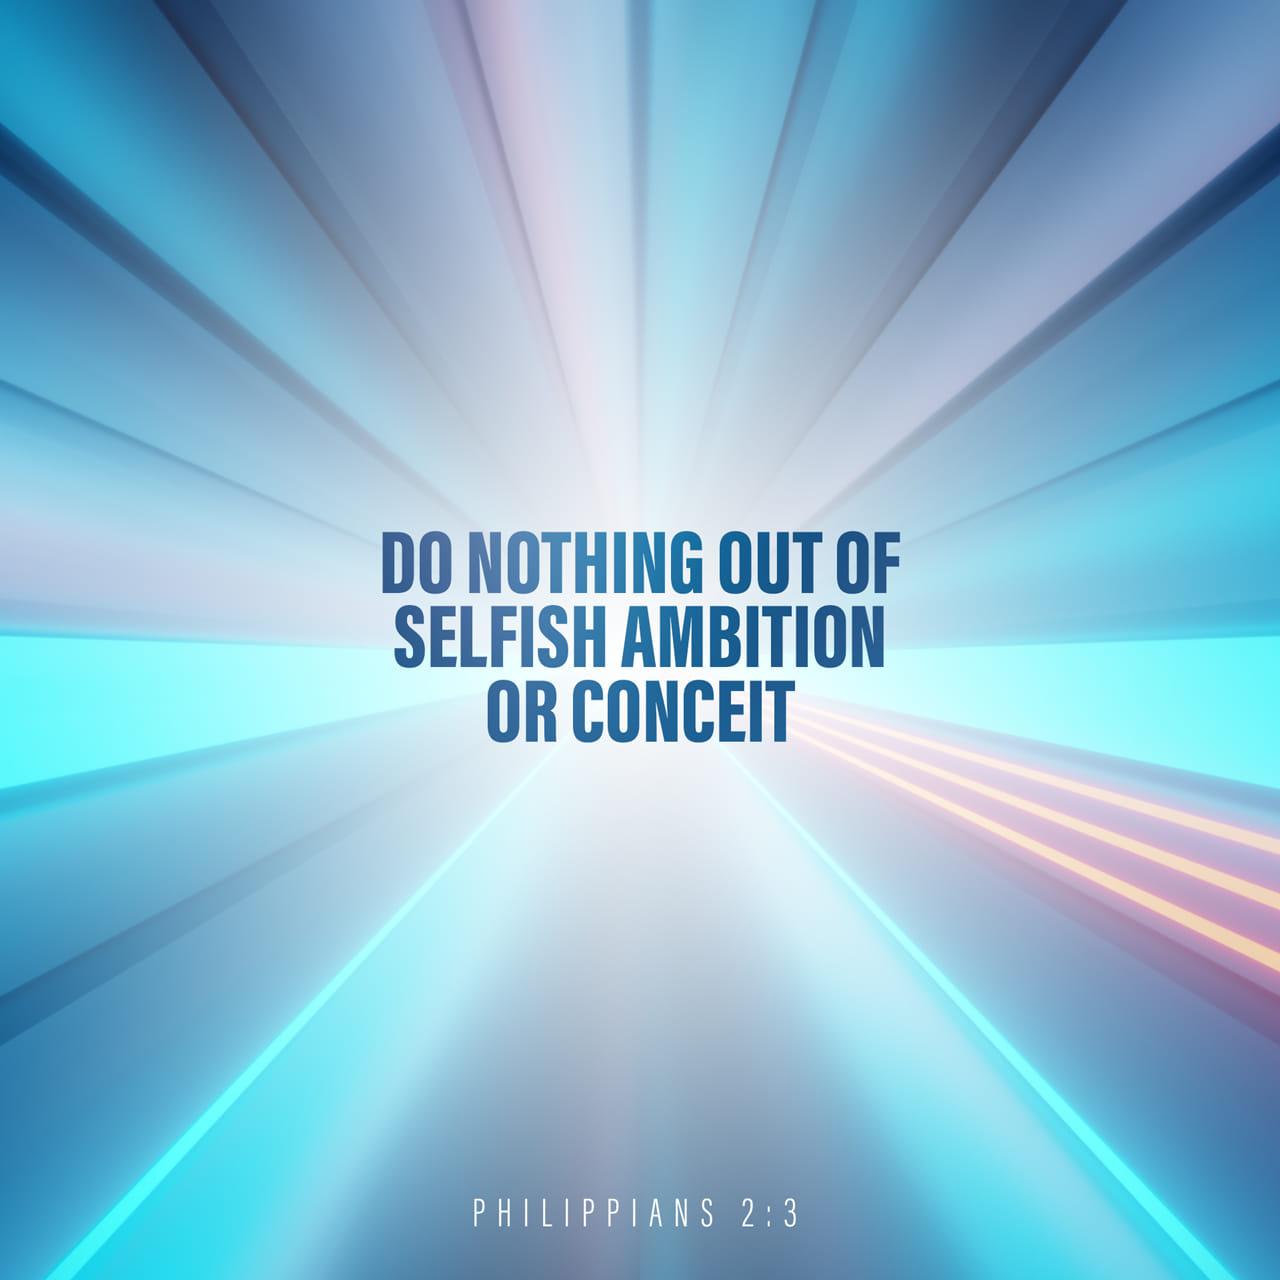 Bible Verse of the Day - day 153 - image 28536 (Philippians 2:1-4)